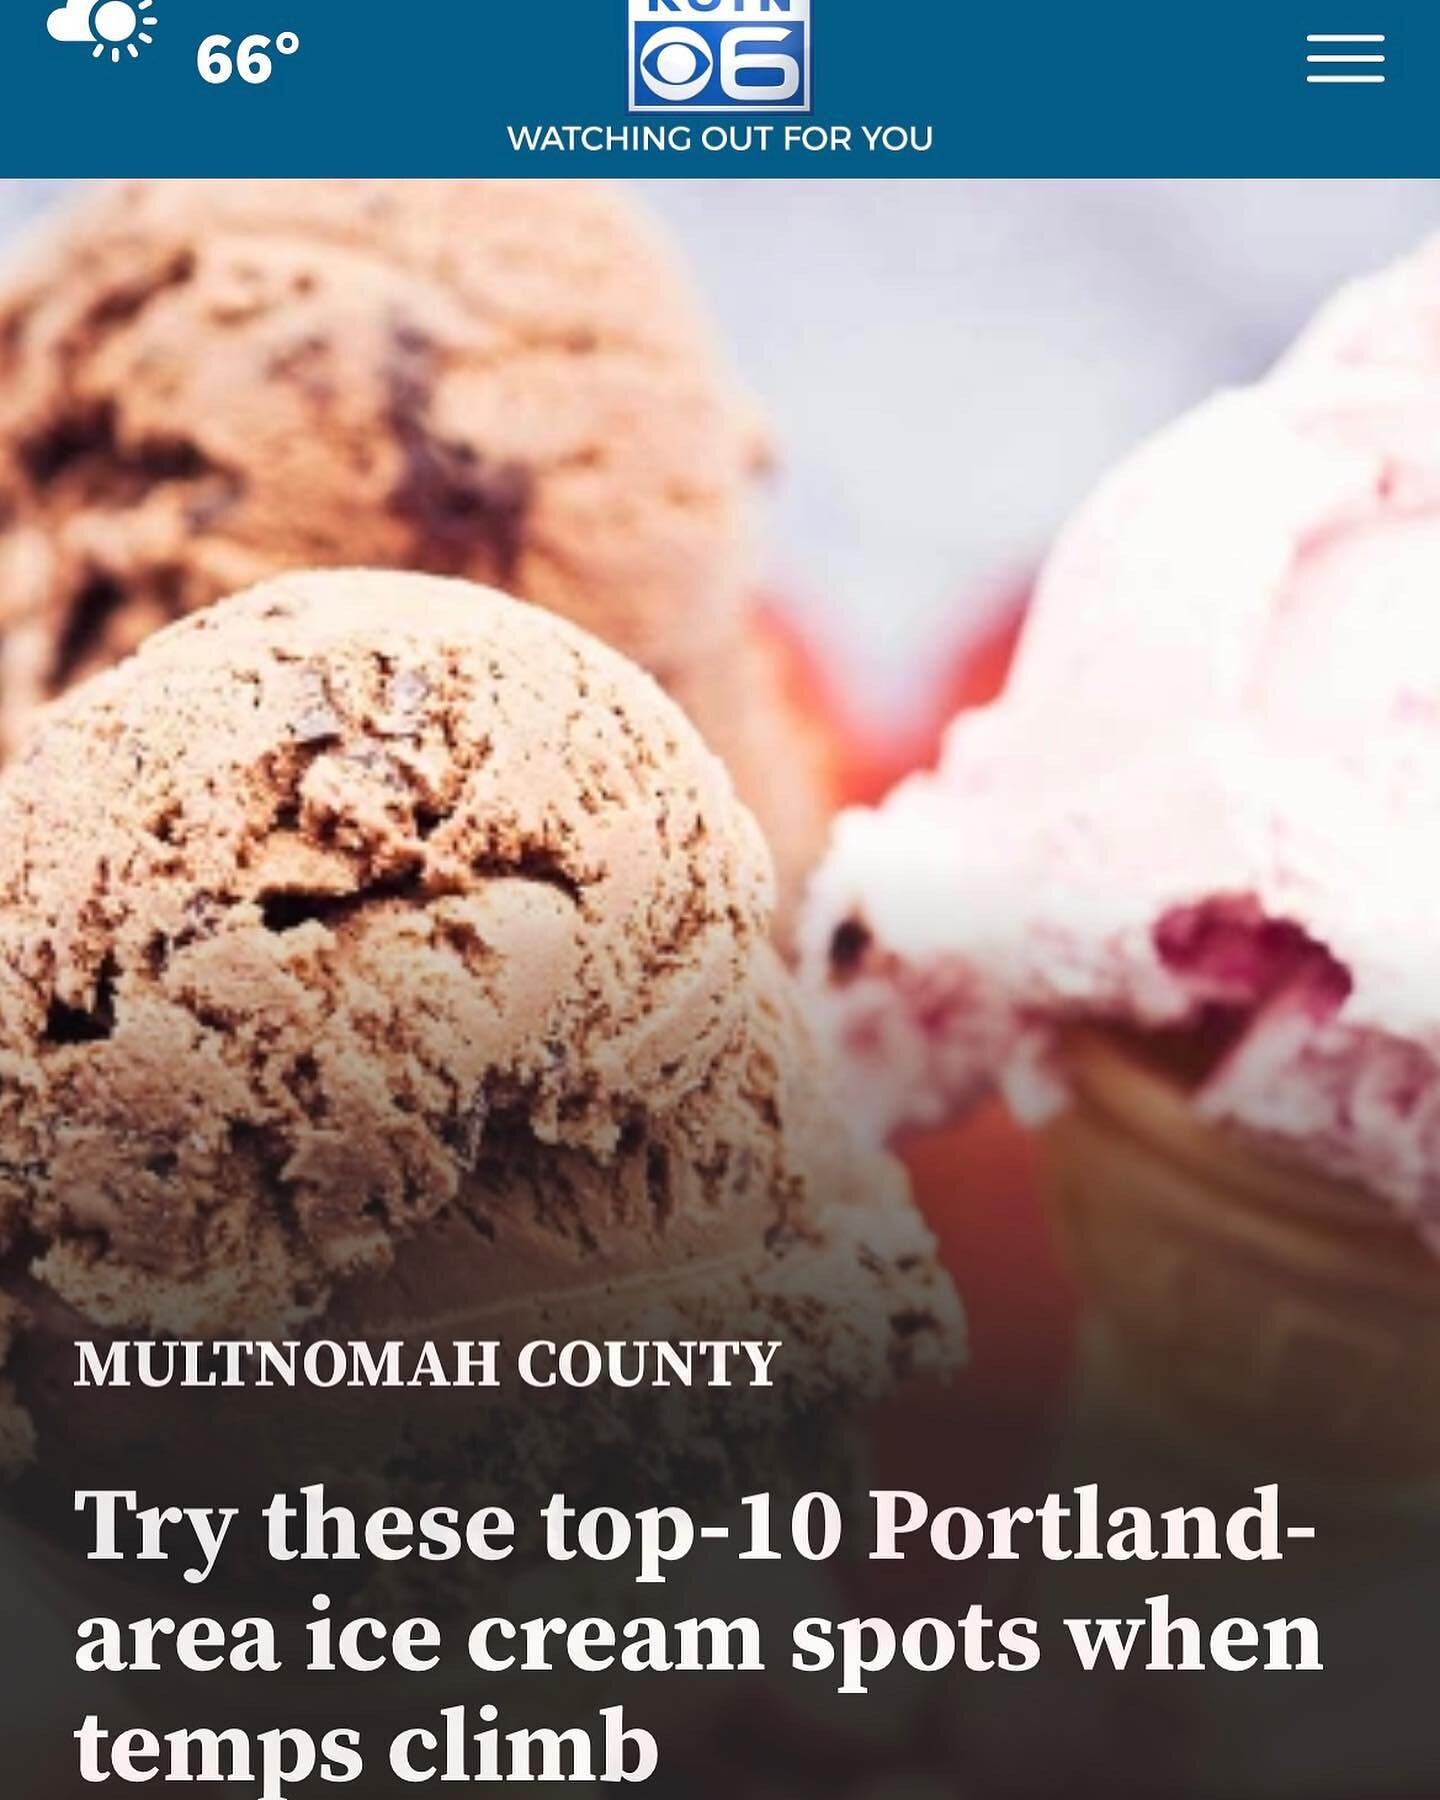 McBee&rsquo;s made Yelp&rsquo;s top 10 Portland-area ice cream shops! Thank you all for your support, we couldn&rsquo;t have done it without you!